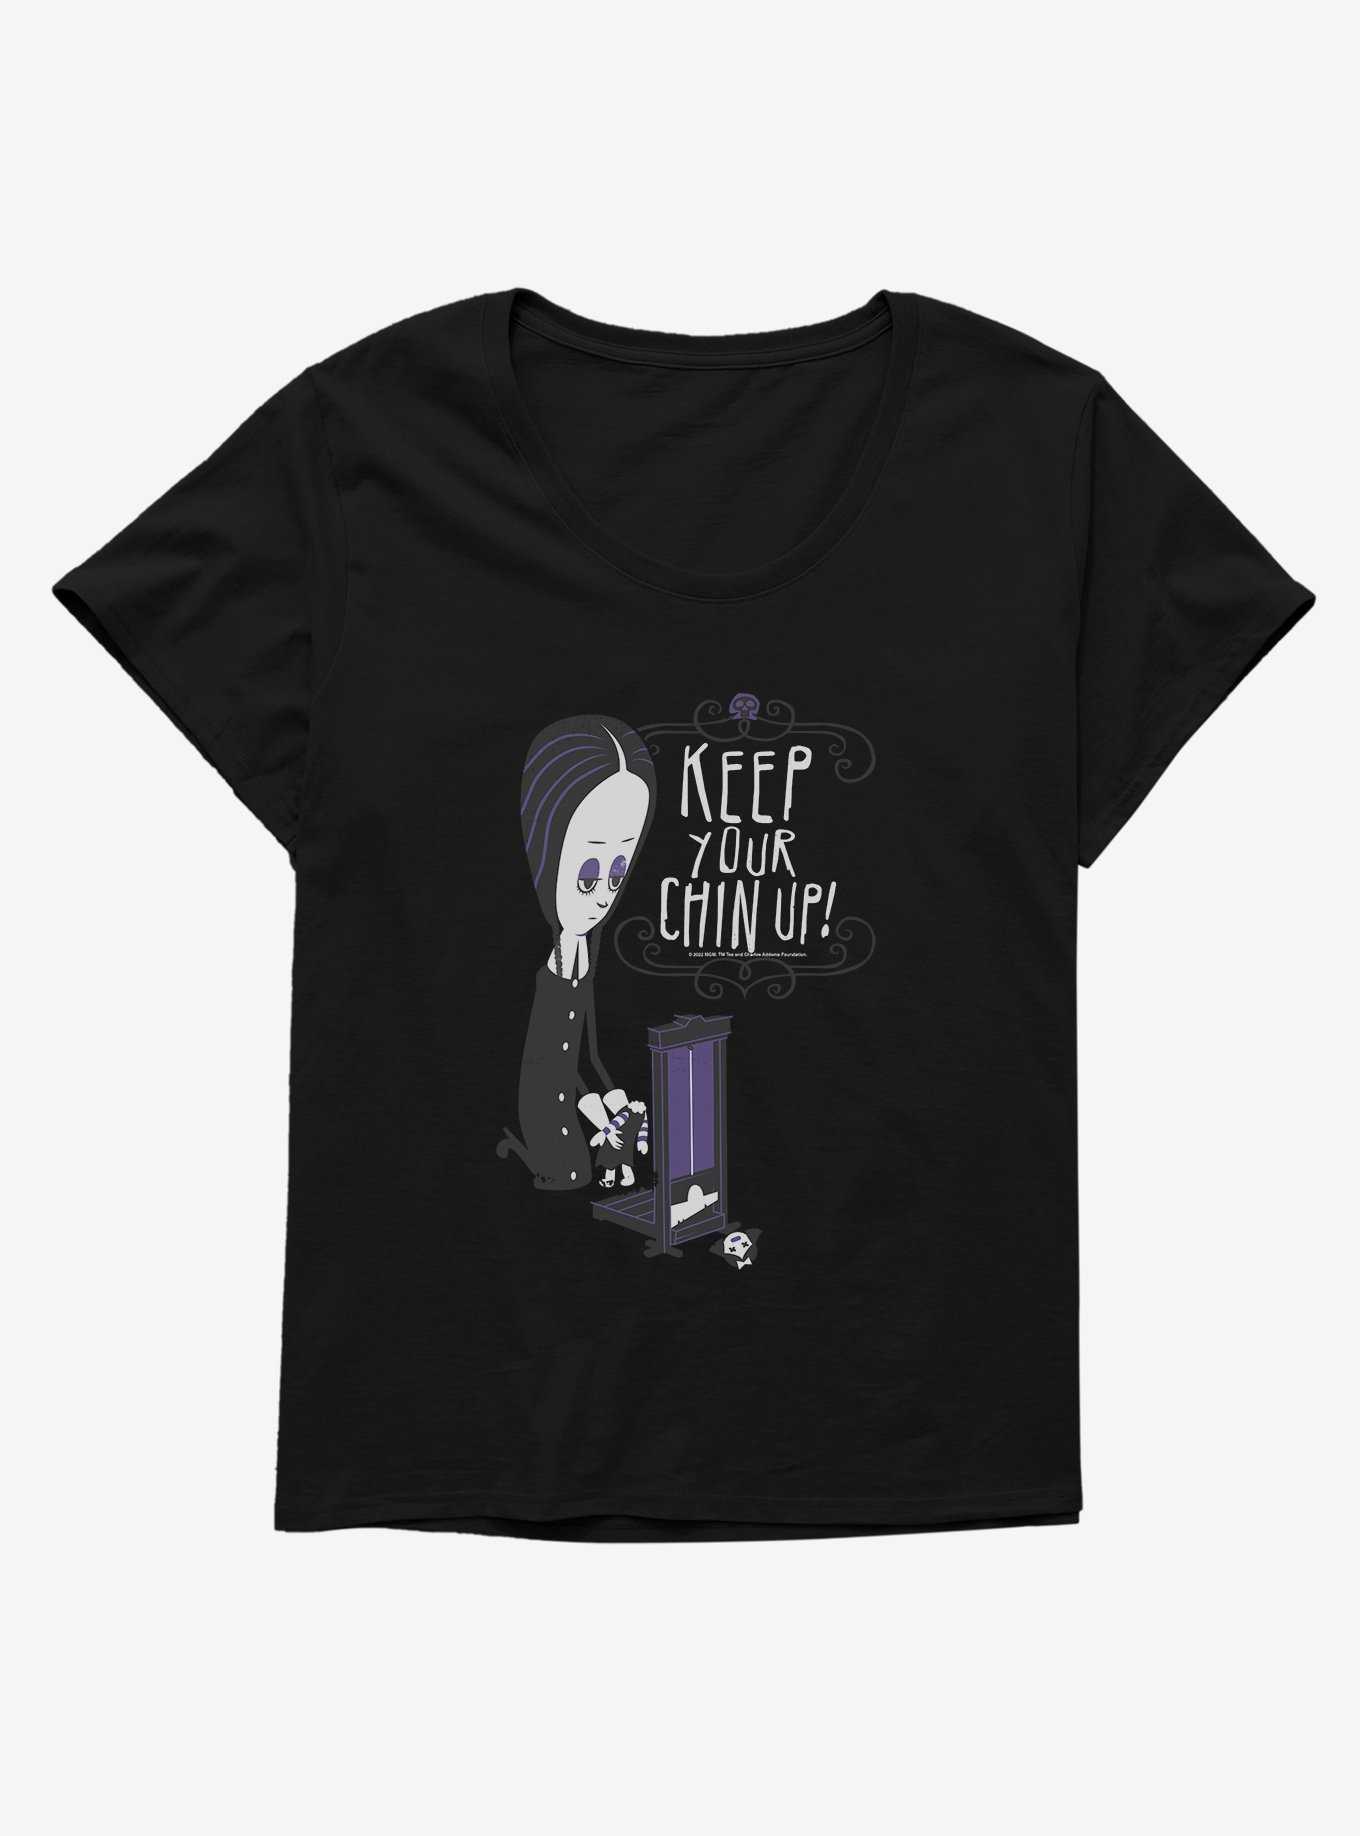 Addams Family Keep Your Chin Up! Girls T-Shirt Plus Size, , hi-res